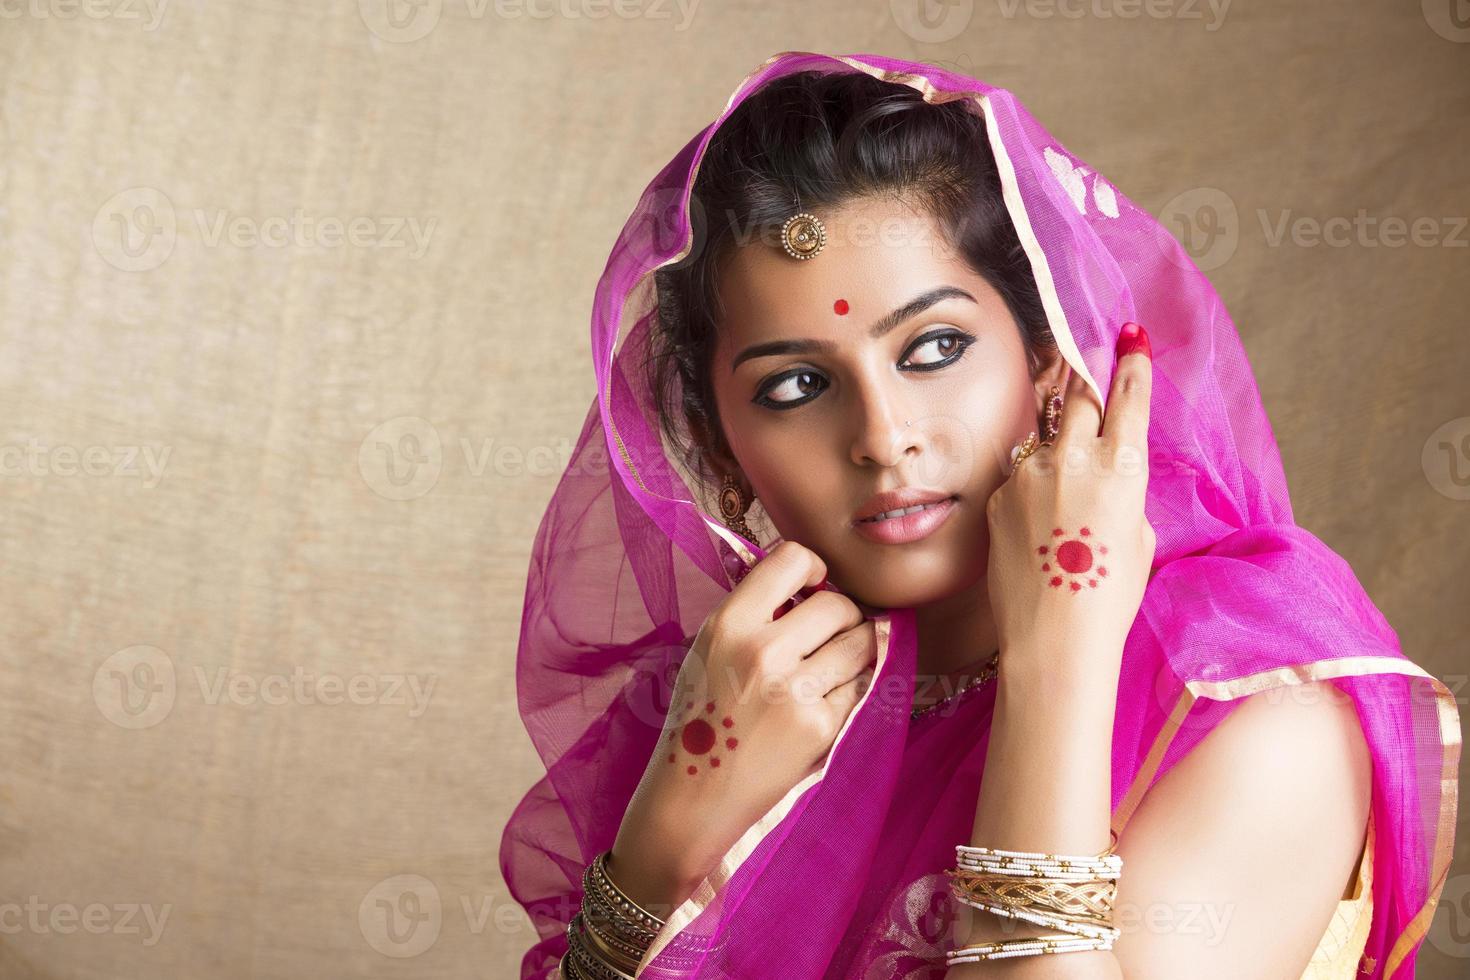 belle fille indienne traditionnelle photo